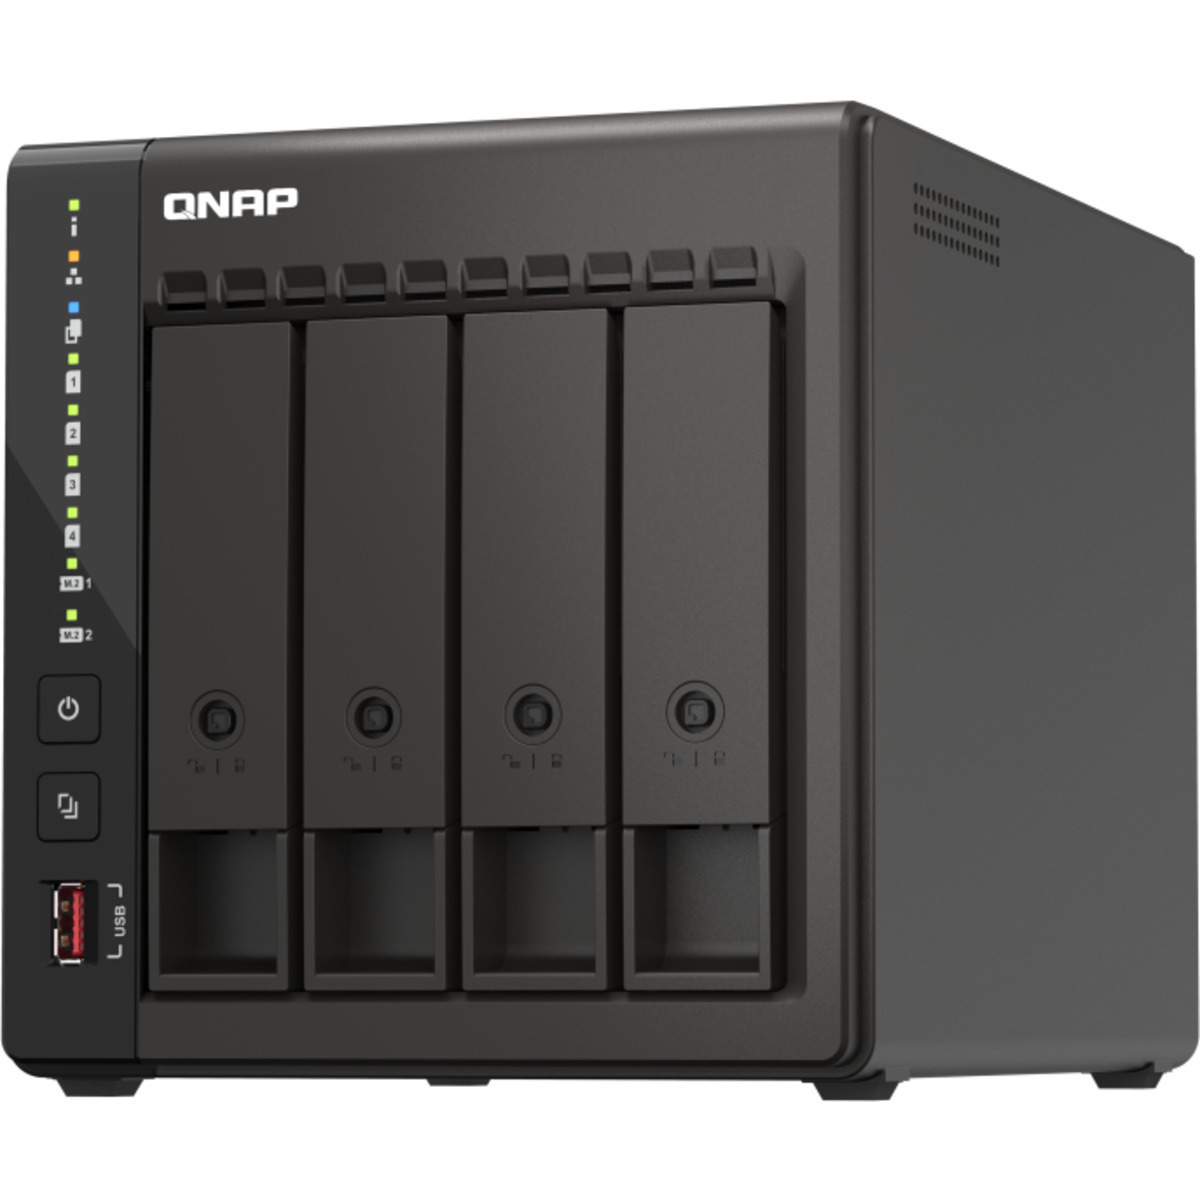 QNAP TS-453E 12tb 4-Bay Desktop Multimedia / Power User / Business NAS - Network Attached Storage Device 2x6tb Seagate BarraCuda ST6000DM003 3.5 5400rpm SATA 6Gb/s HDD CONSUMER Class Drives Installed - Burn-In Tested TS-453E